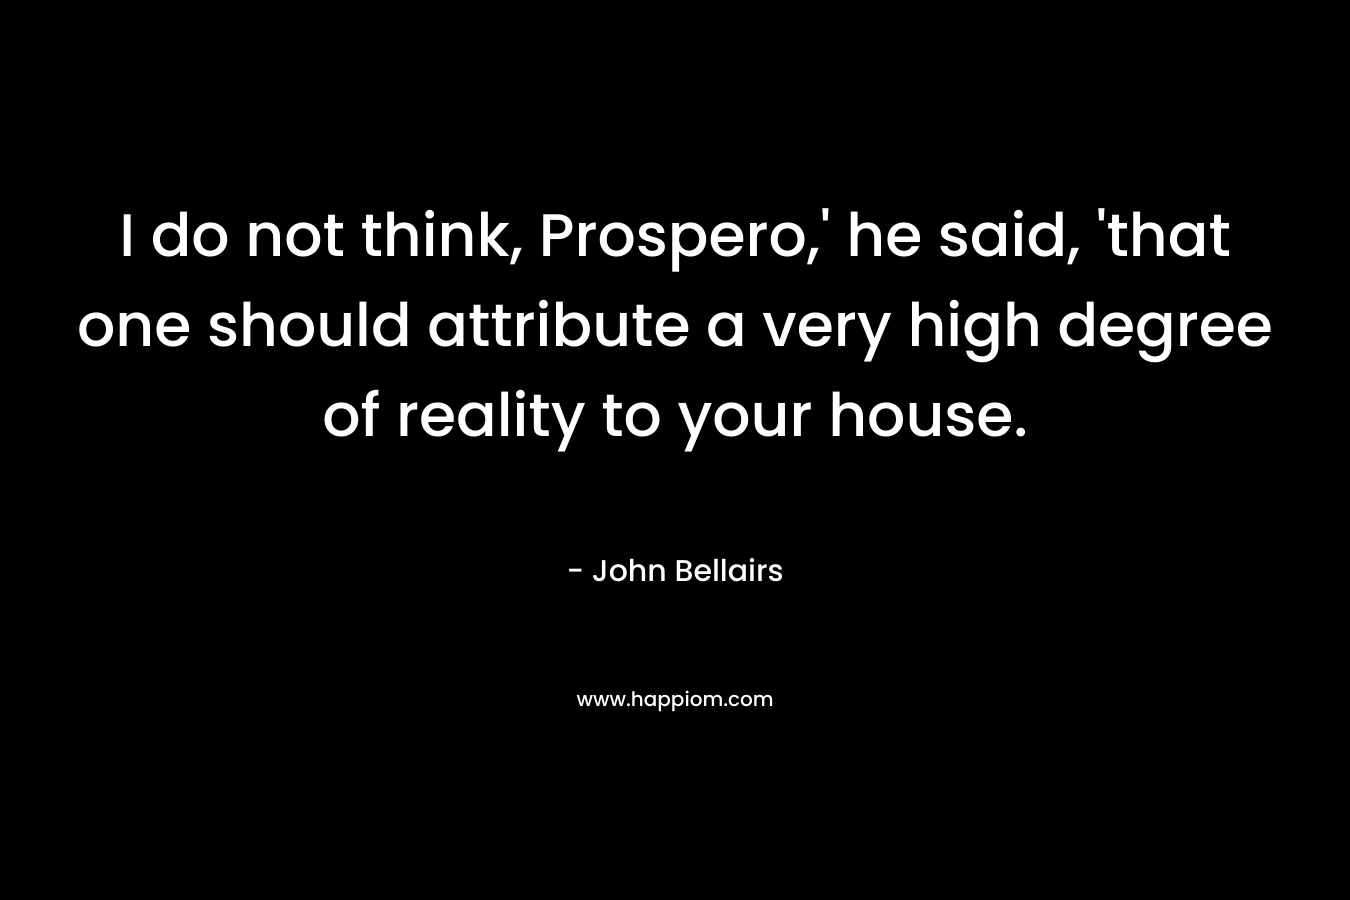 I do not think, Prospero,' he said, 'that one should attribute a very high degree of reality to your house.